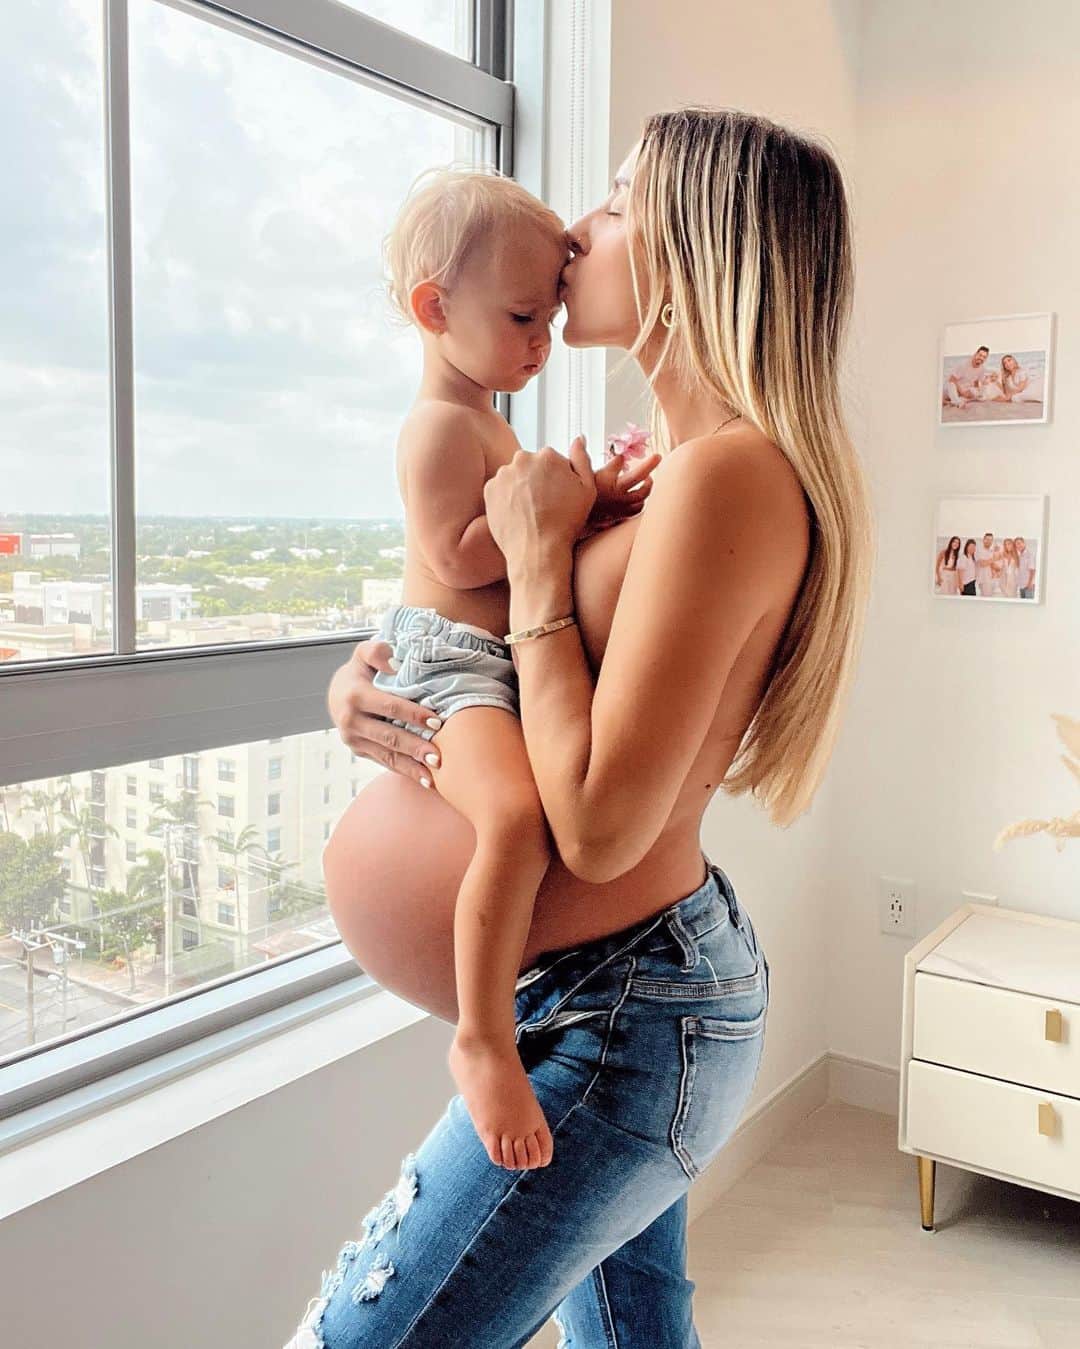 Bruna Rangel Limaのインスタグラム：「This is MOTHERHOOD🤍 To the world we are mothers, but to our babies we are the absolute world! That is the greatest gift 🥹 To the one who made me a mama thank you for making every day special, I love you sweet girl 🫶🏼   HAPPY MOTHERS DAY TO ALL✨ we are strong, selfless, & extraordinary. Hope you’re celebrated everyday!」